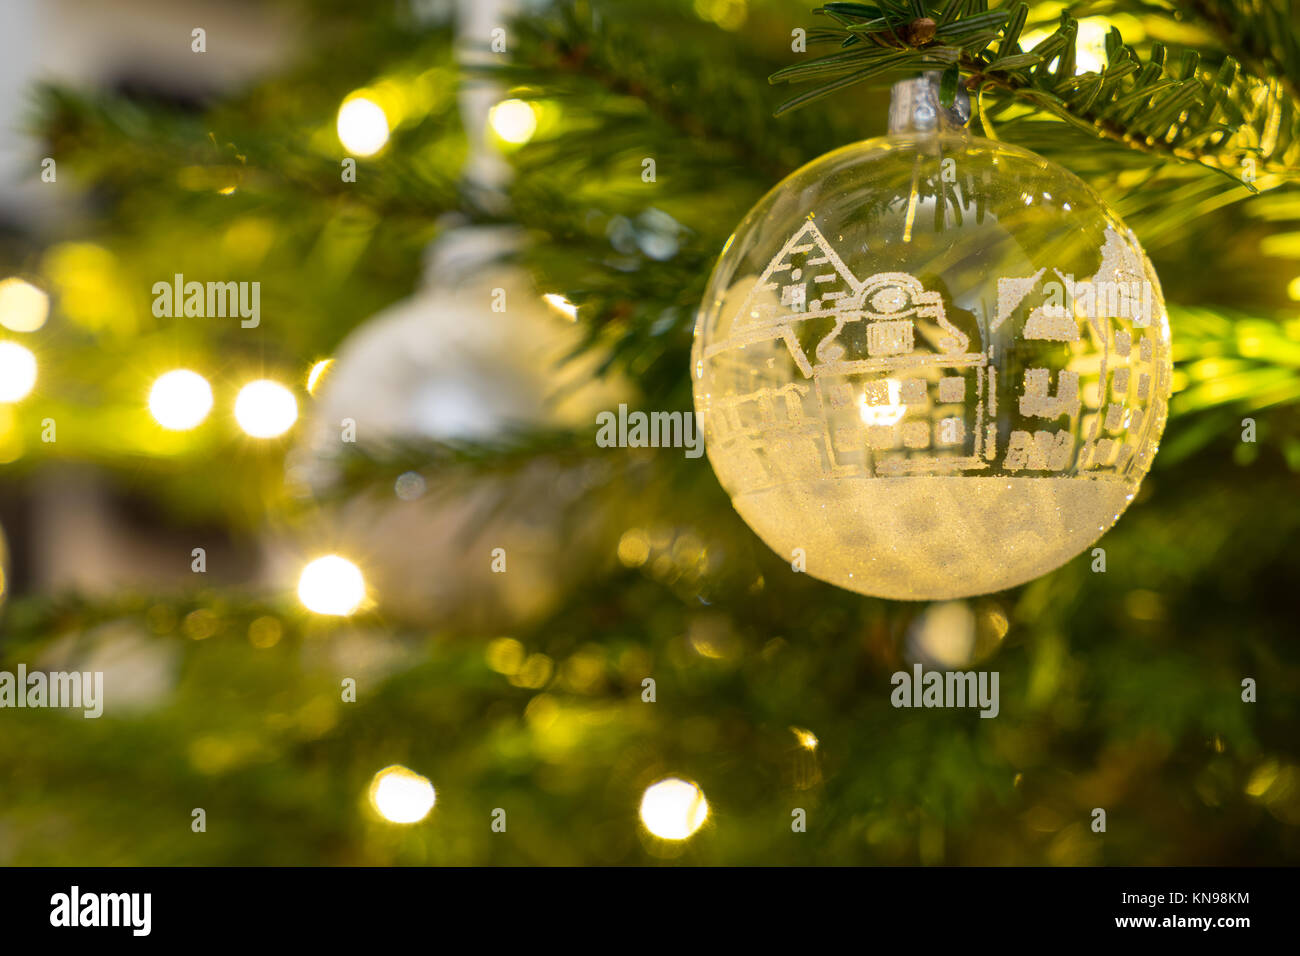 Christmas decoration glass and white ball hanging in a Nordman christmastree Stock Photo